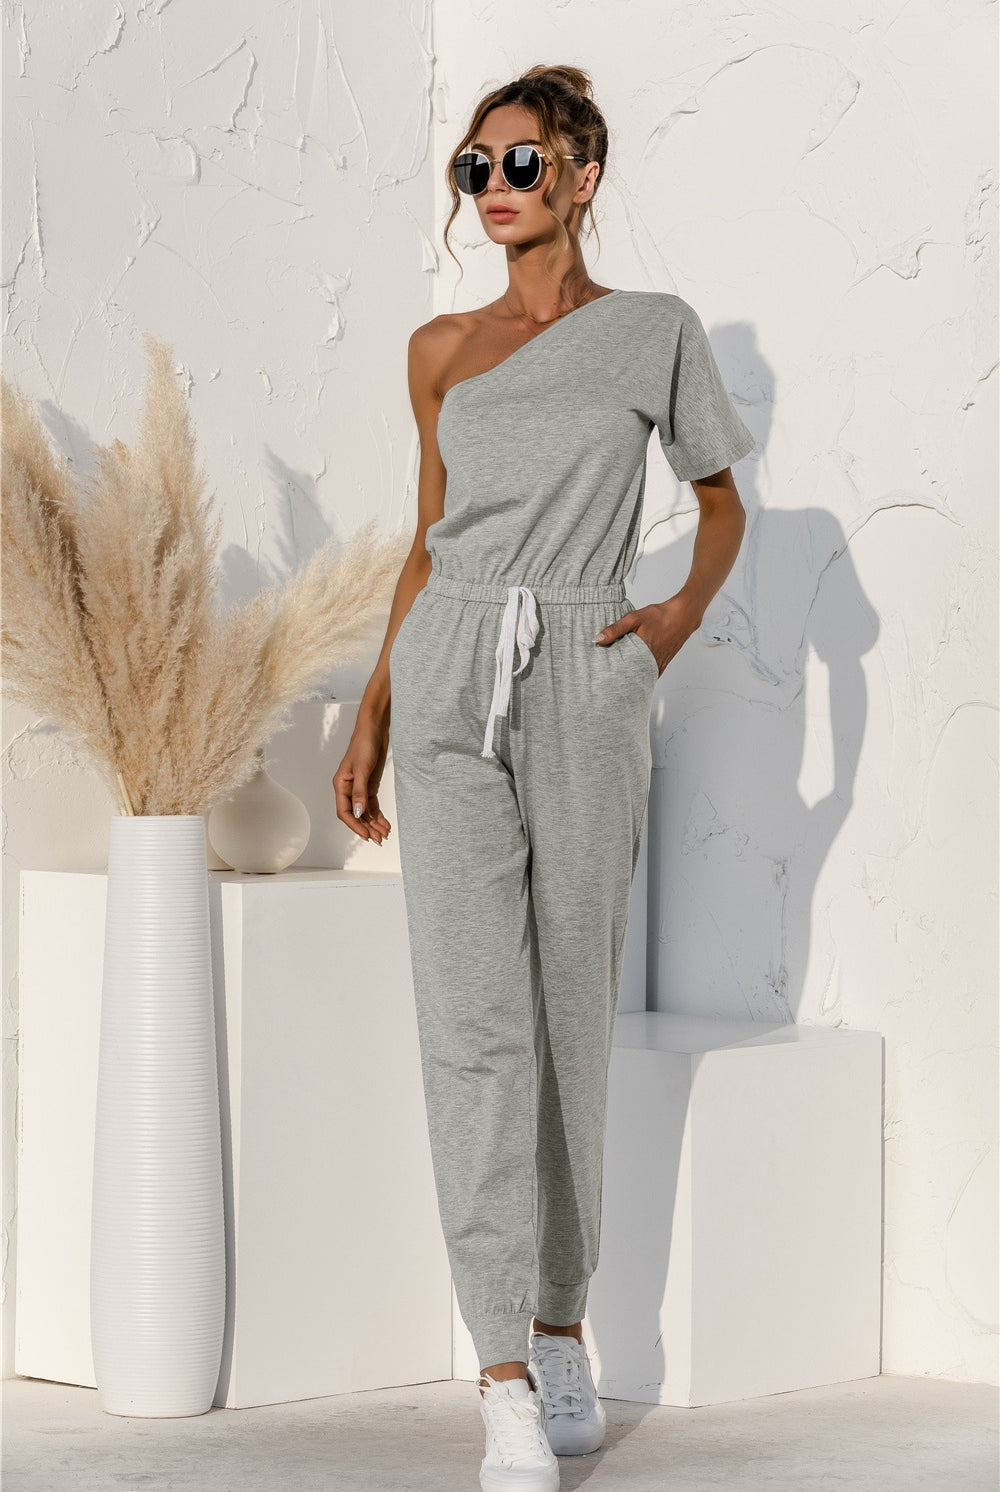 A model poses confidently in a one-shoulder jumpsuit with a drawstring waist, paired with classic white sneakers, ready for a relaxed yet fashionable day out.